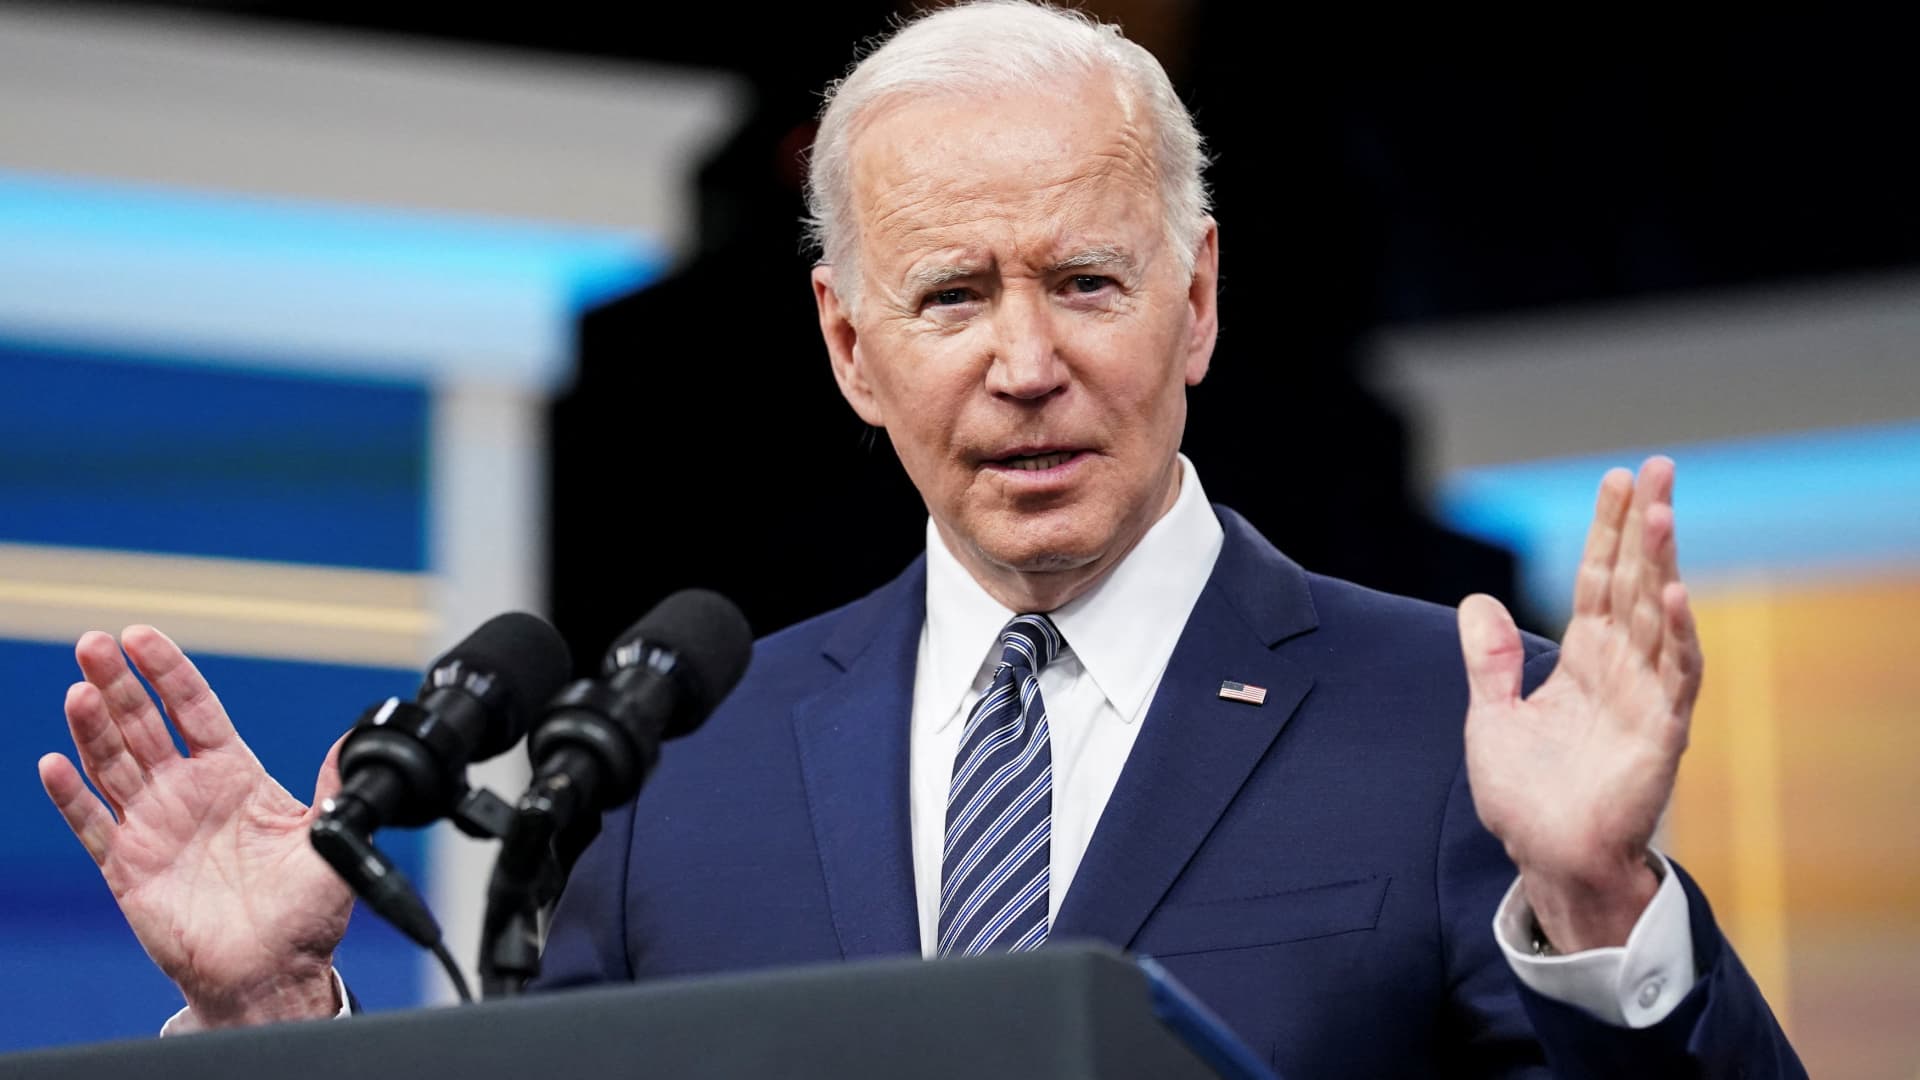 Environmental groups sue Biden to block 3,500 oil and gas drilling permits